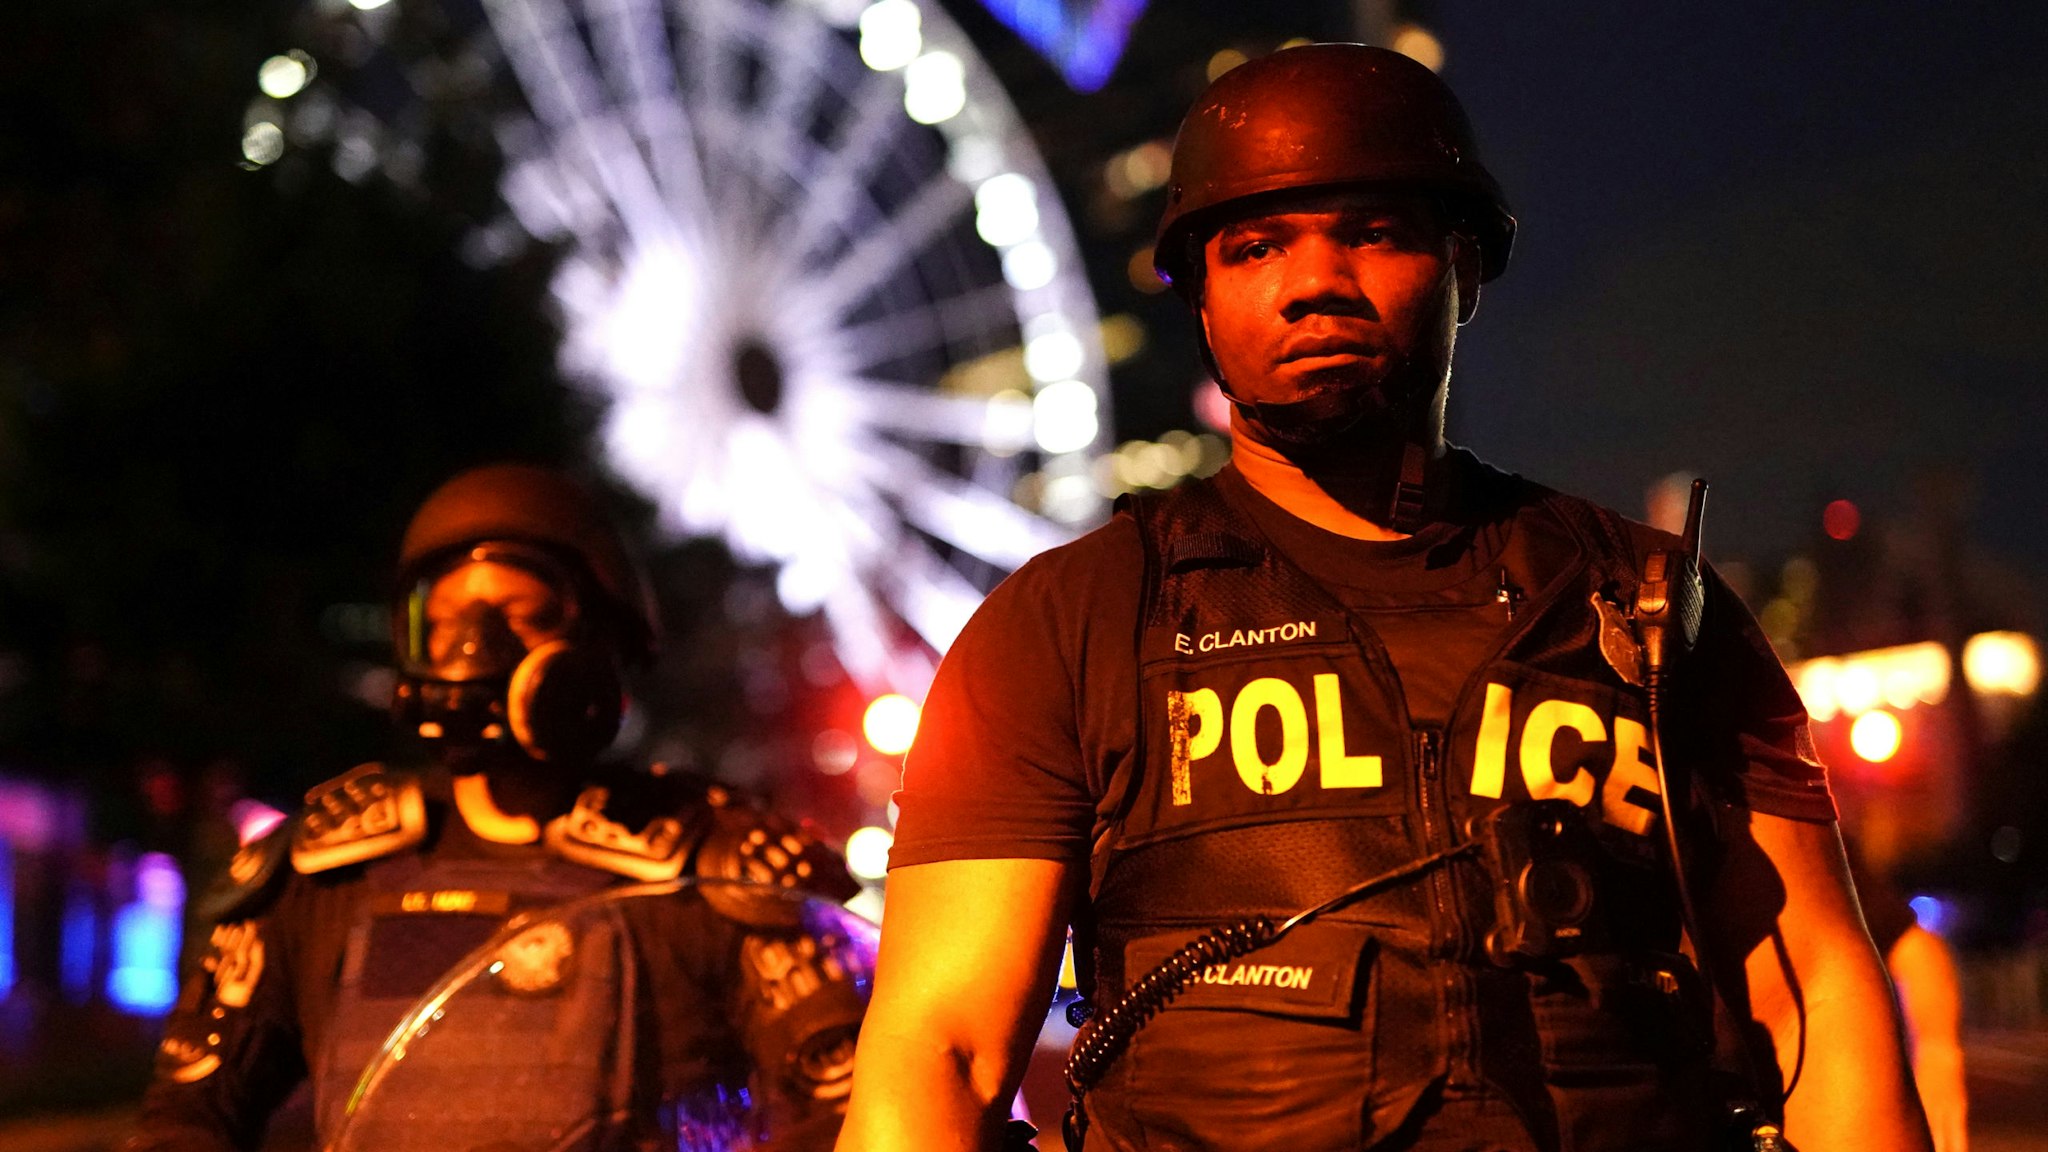 ATLANTA, GA - MAY 31: A police officer is seen during a demonstration on May 31, 2020 in Atlanta, Georgia. Across the country, protests have erupted following the recent death of George Floyd while in police custody in Minneapolis, Minnesota.